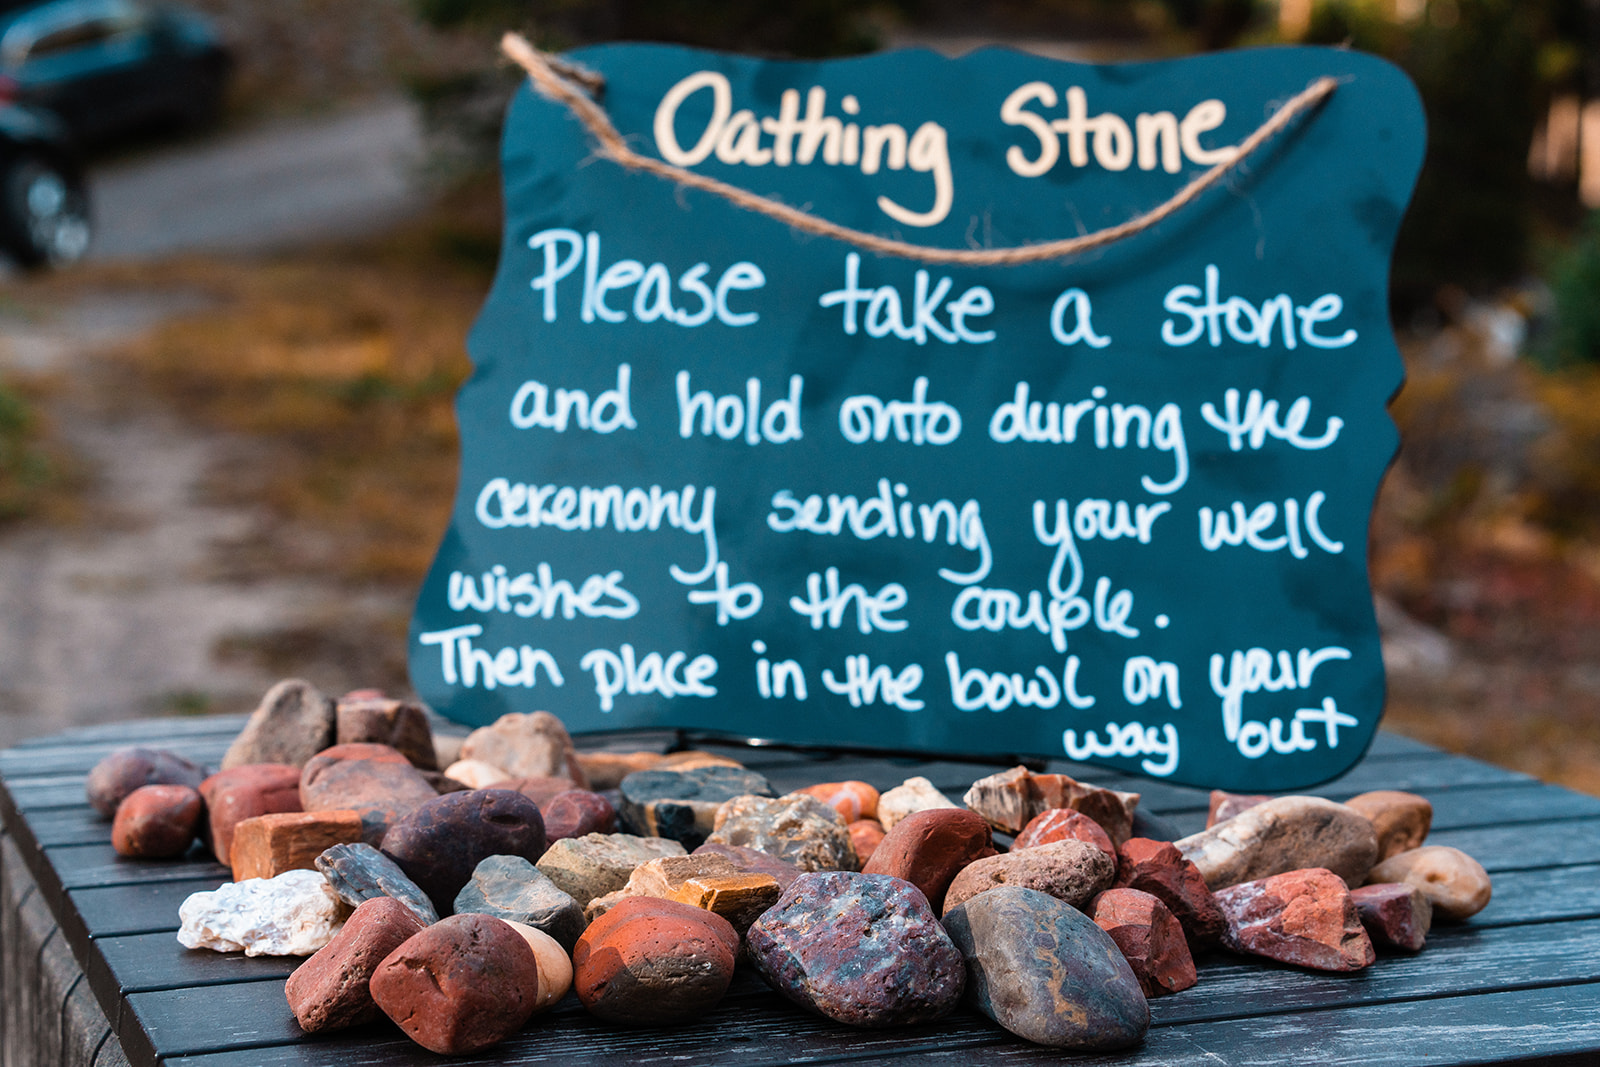 Oathing Stone Ceremony Sign with stones laid out